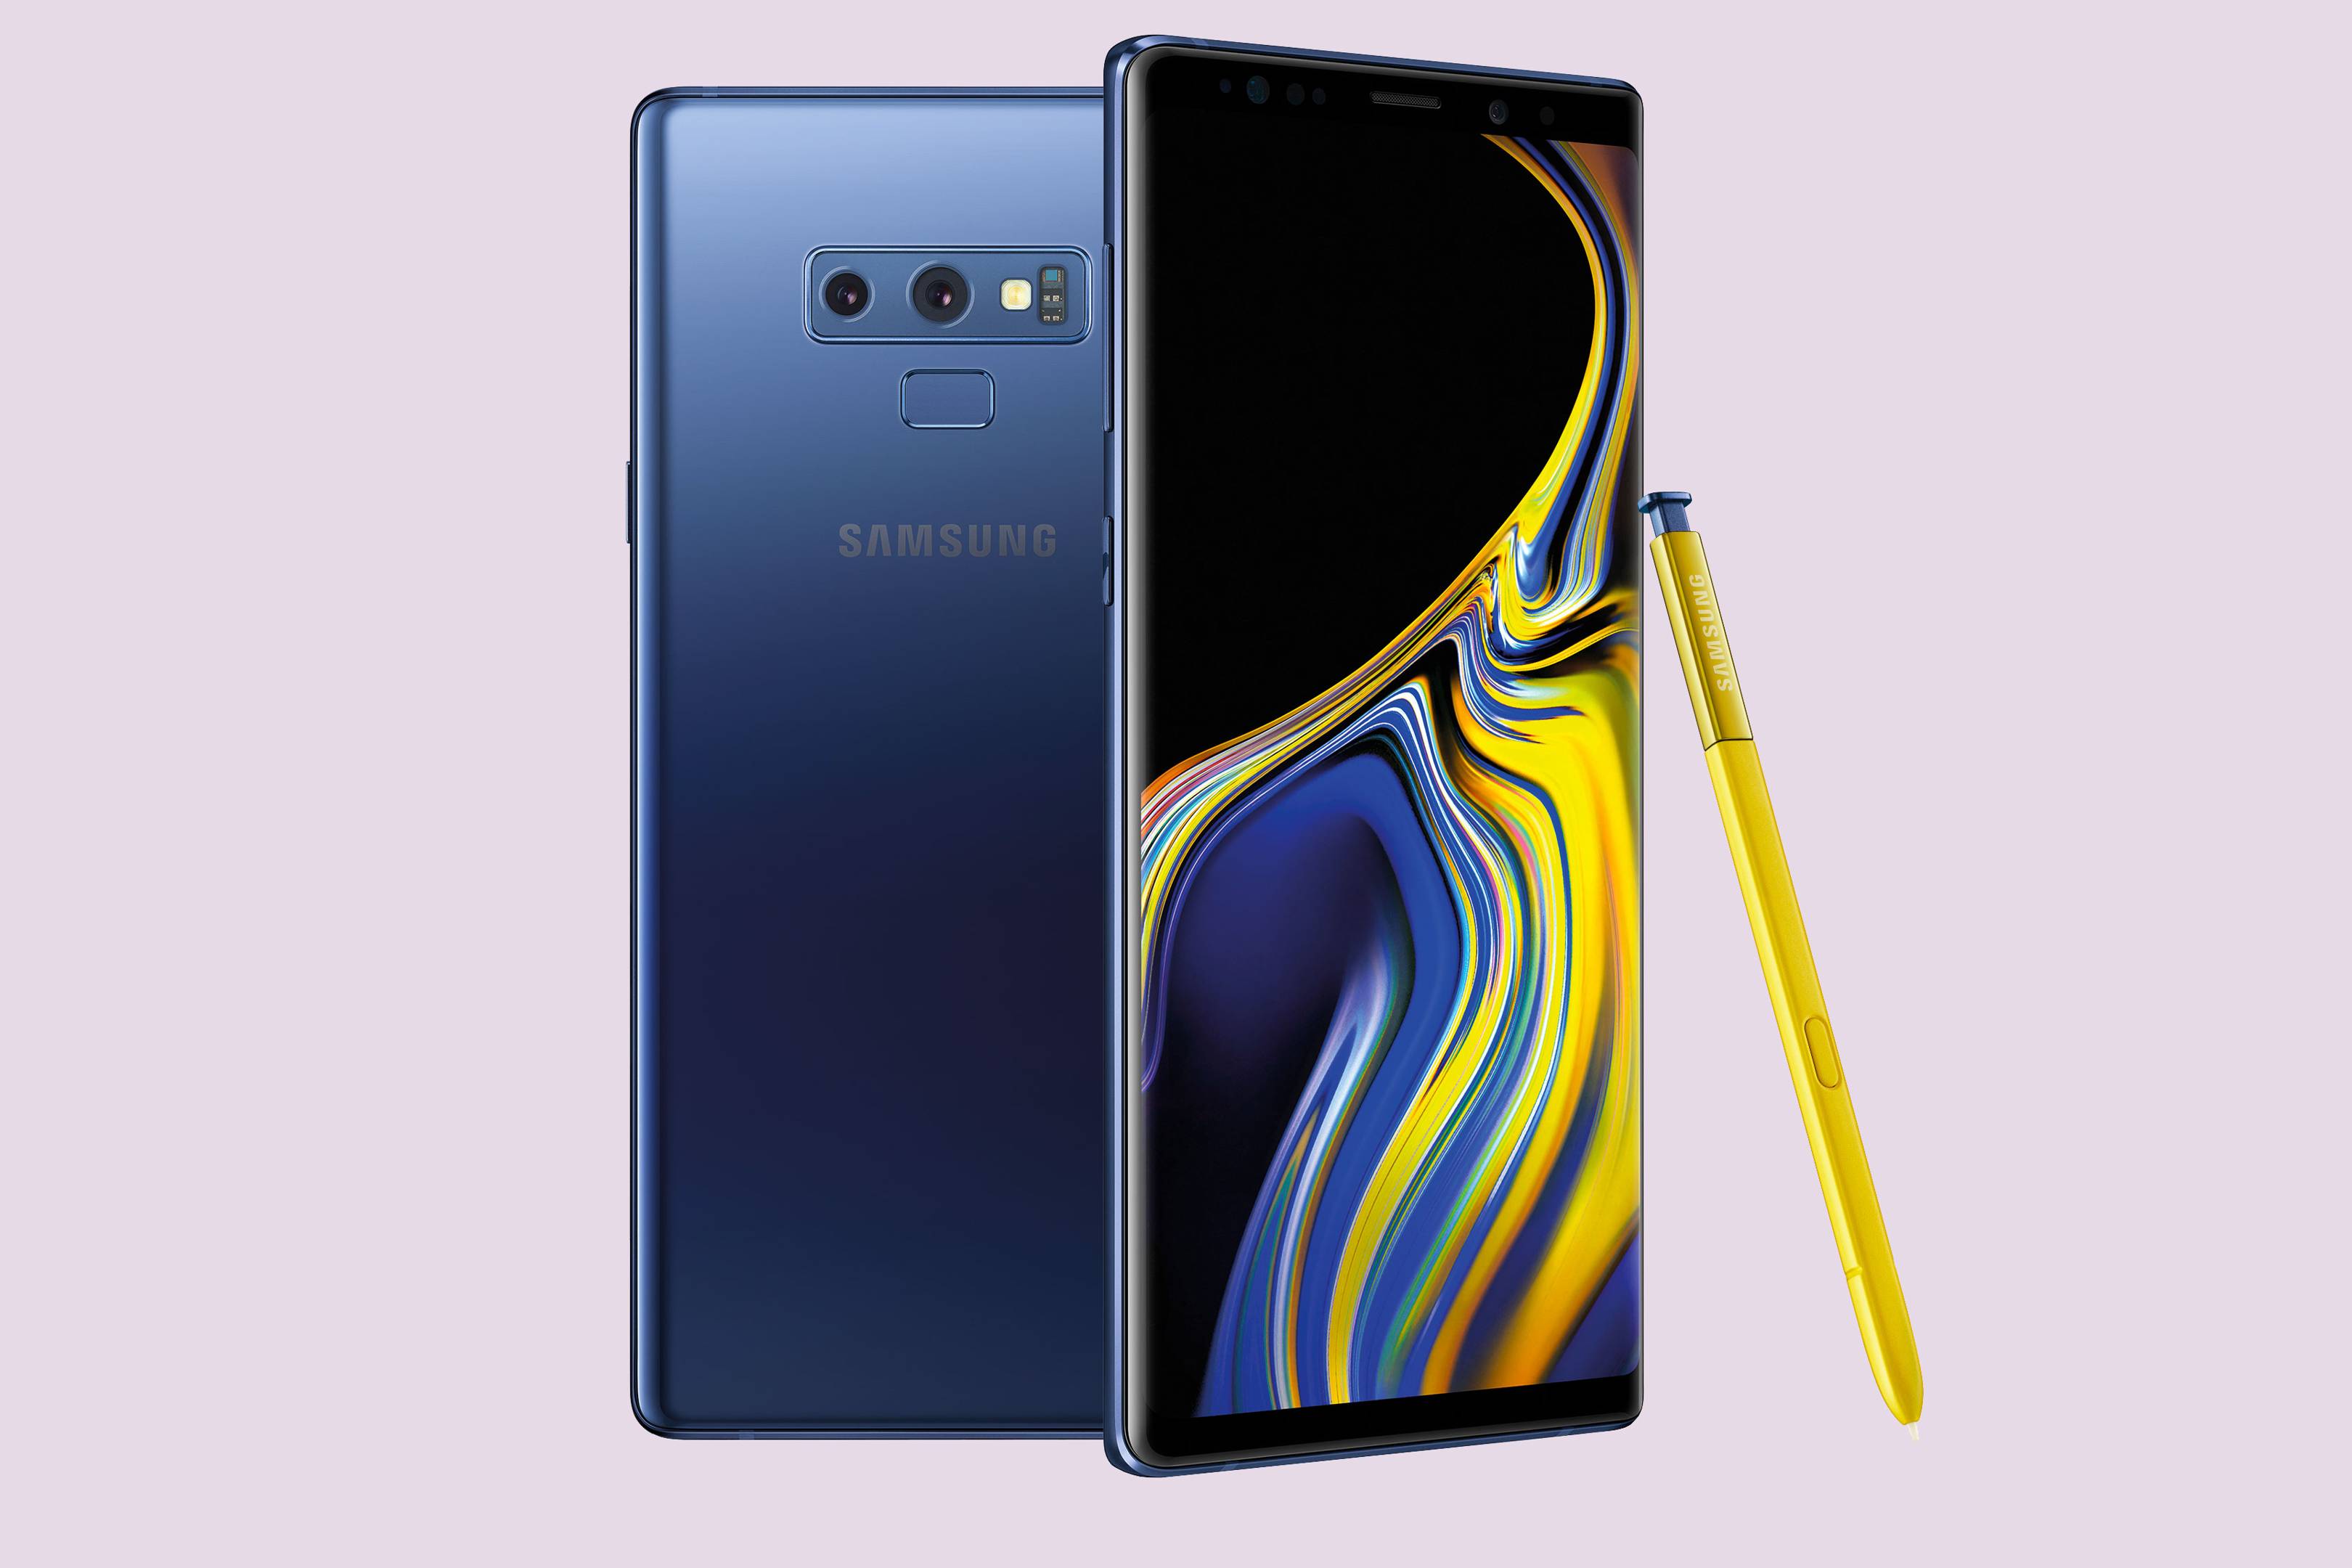 Samsung S Galaxy Note 9 Is More Evolution Than Revolution Wired Uk